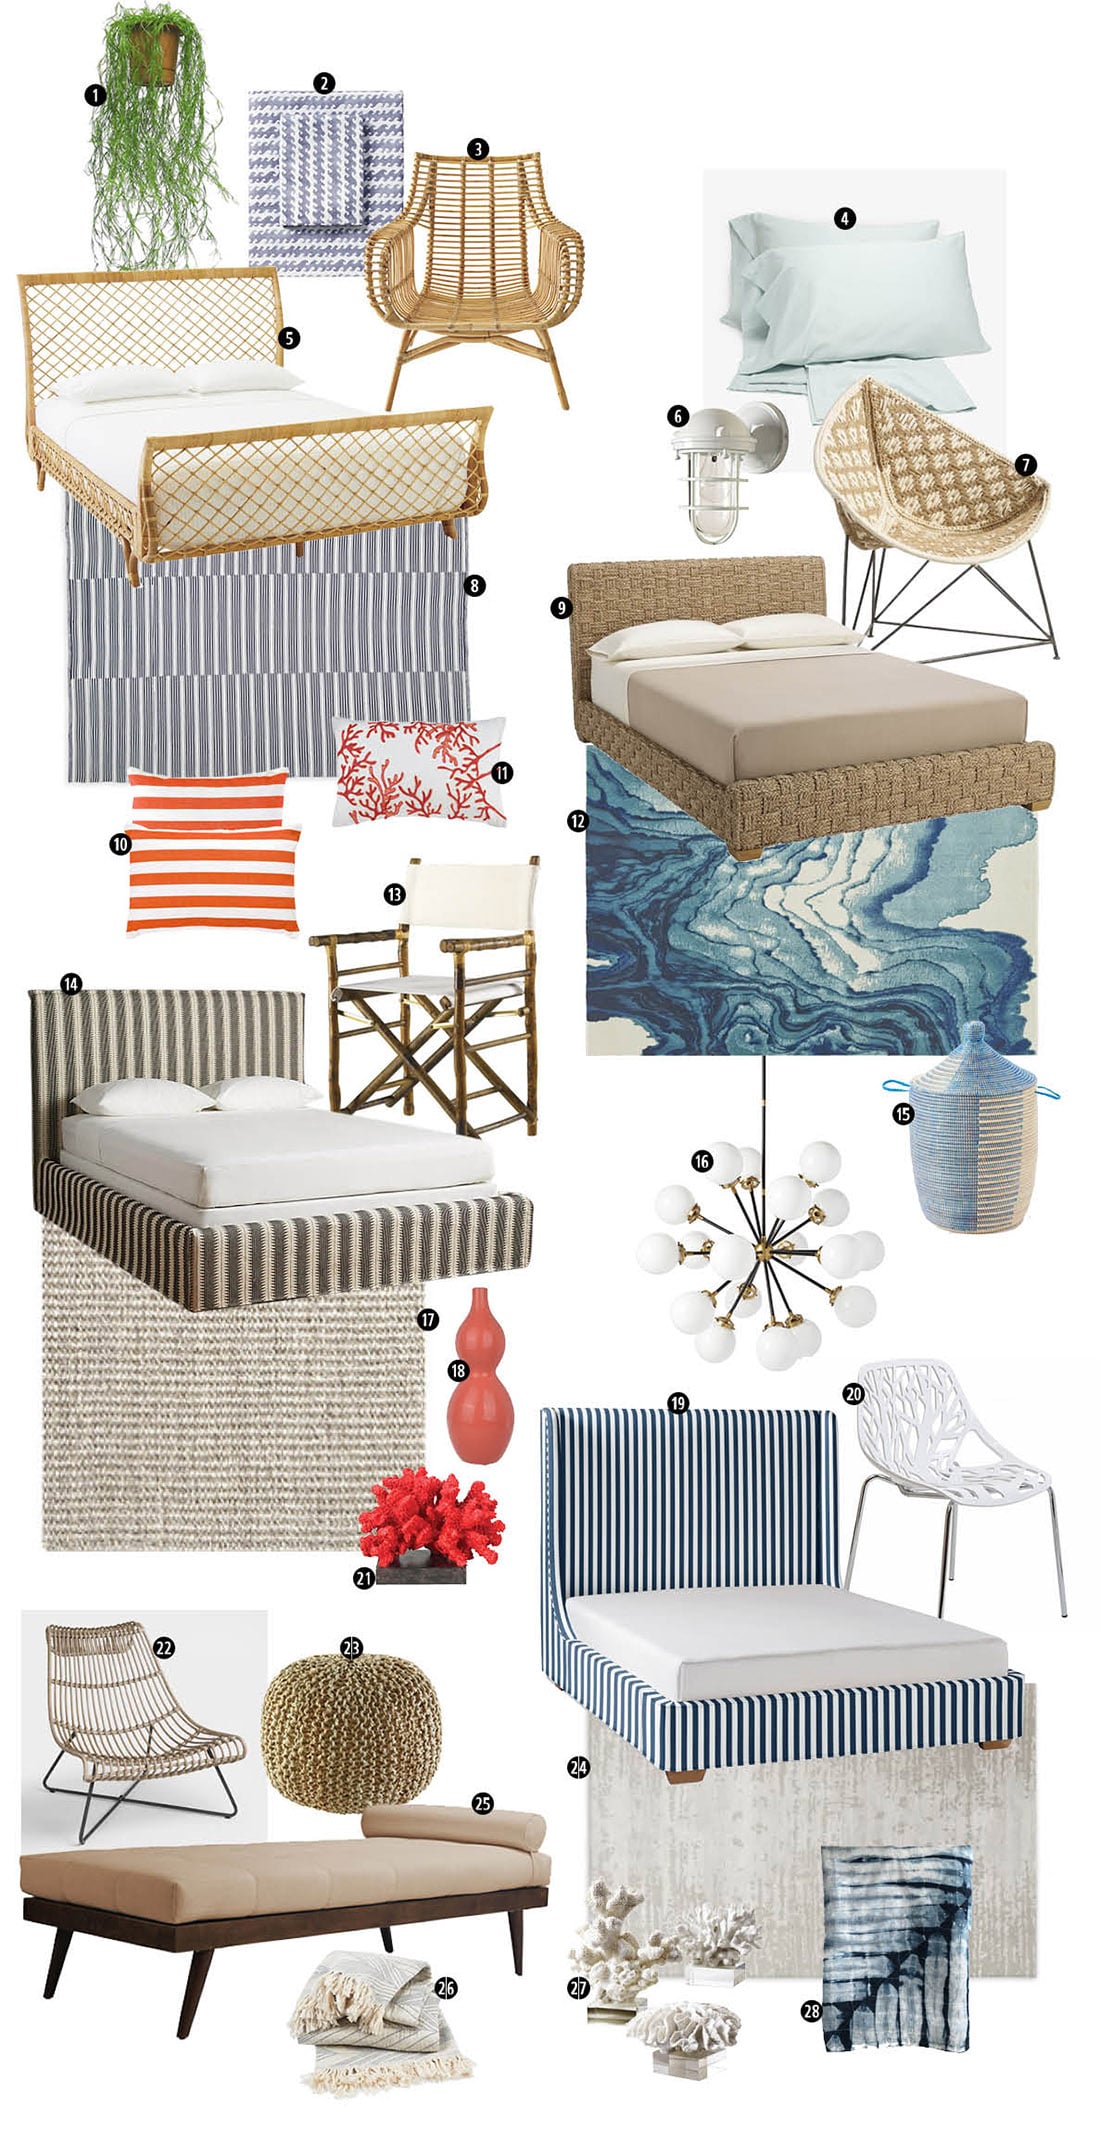 8 Signs Modern Coastal Decor Is The Right Home Style For You